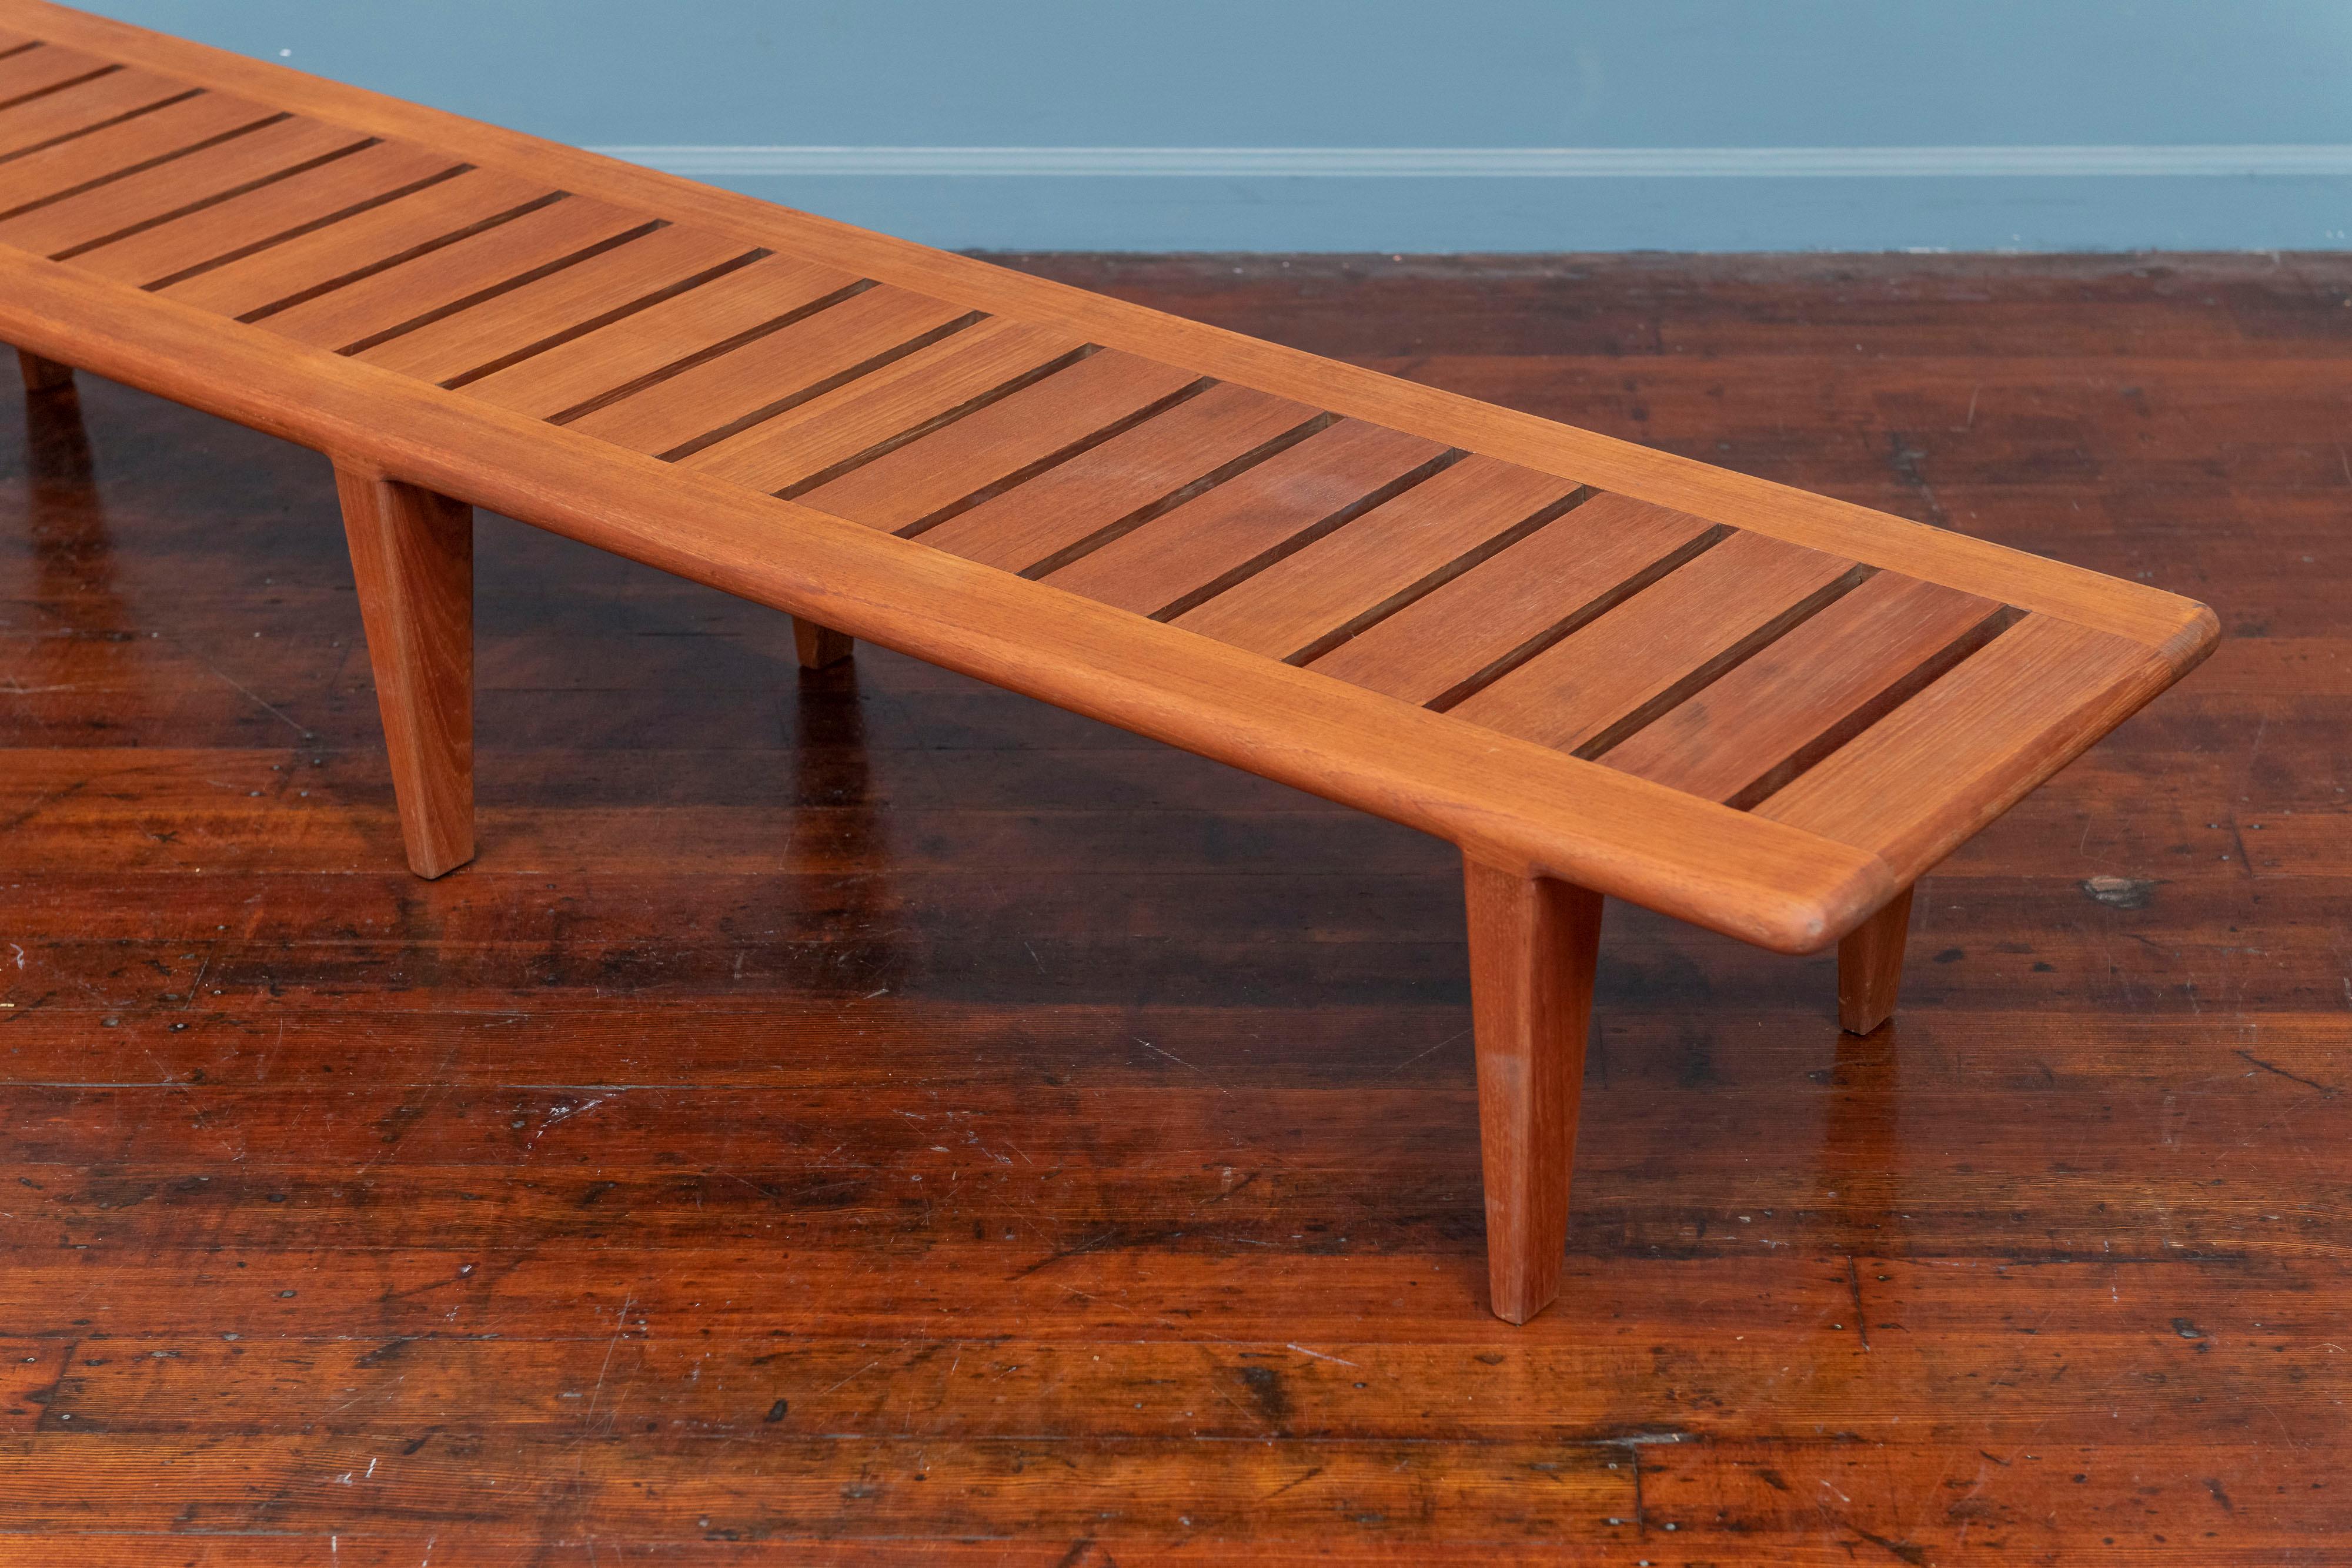 Hans Wegner slatted bench model JH 574 for Johannes Hansen, Denmark. 
High quality construction and attention to detail this bench is perfect for an entry way or under a large work of art. Made from solid teak with rounded edges and superb